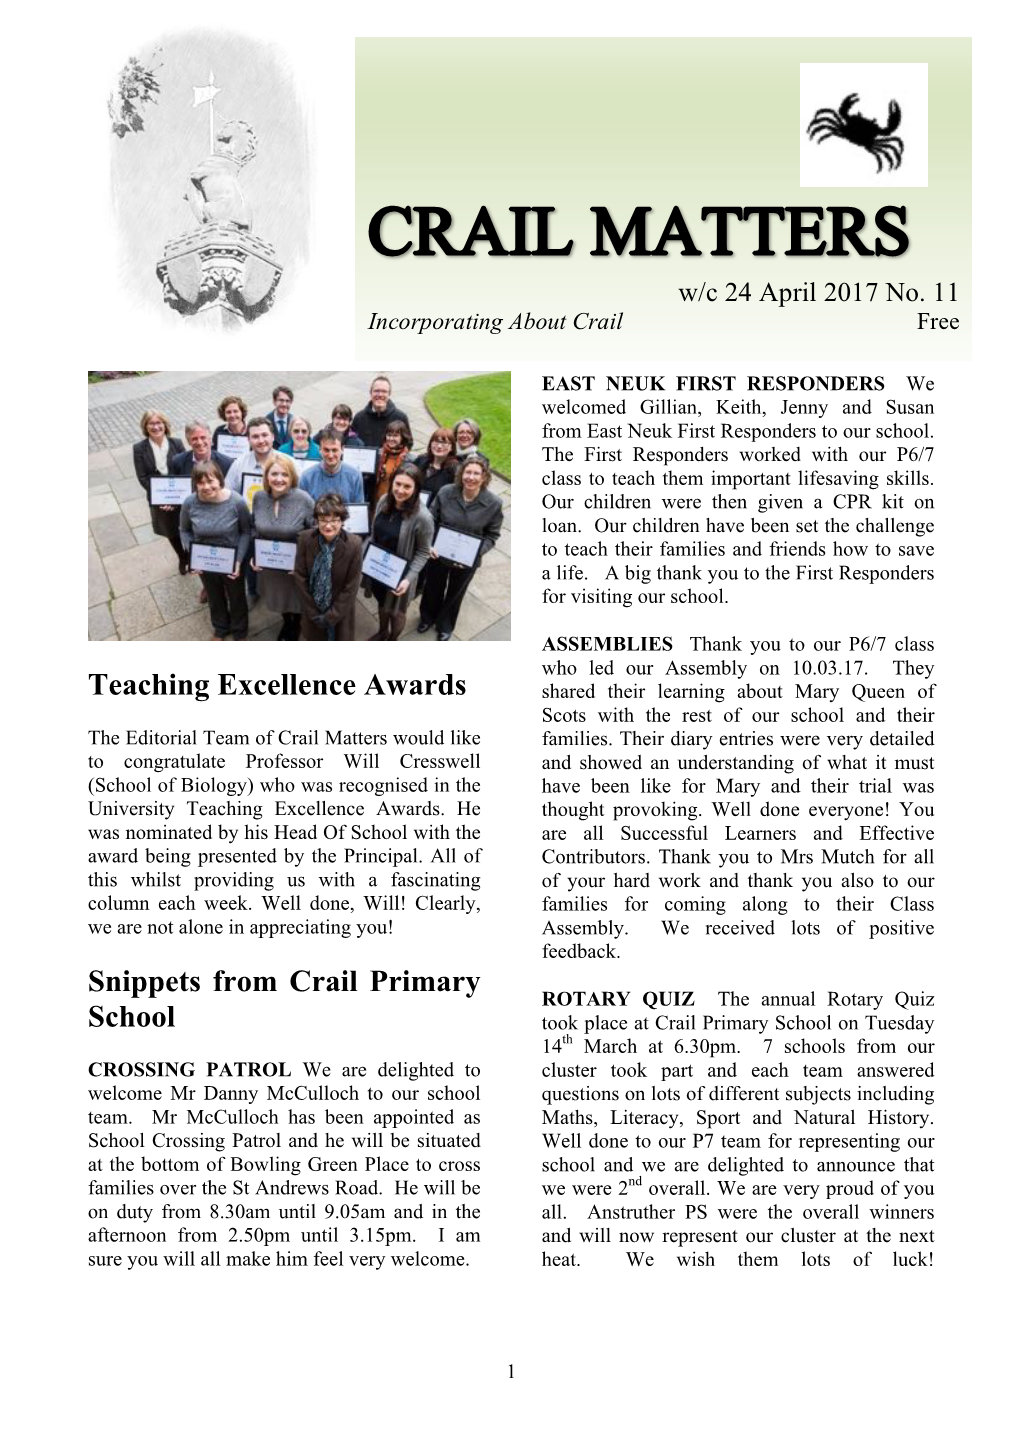 Teaching Excellence Awards Snippets from Crail Primary School